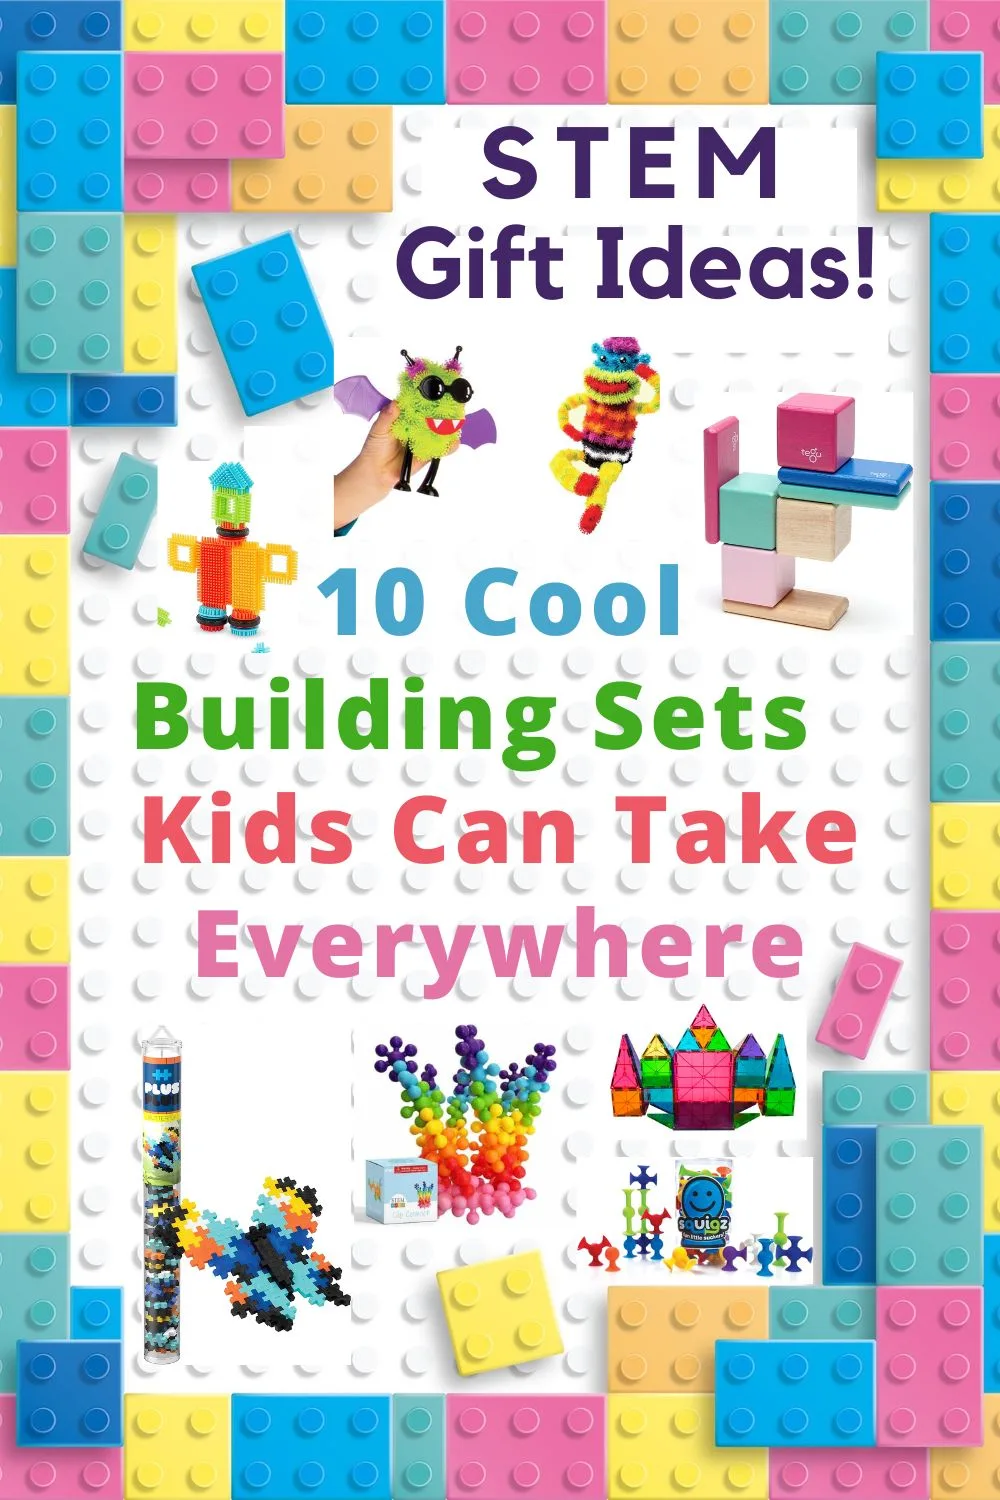 here are 10 creative and unique building sets your kids can use in cars, on planes, at grandma's, in a hotel. anywhere your stem-loving kid wants to build.